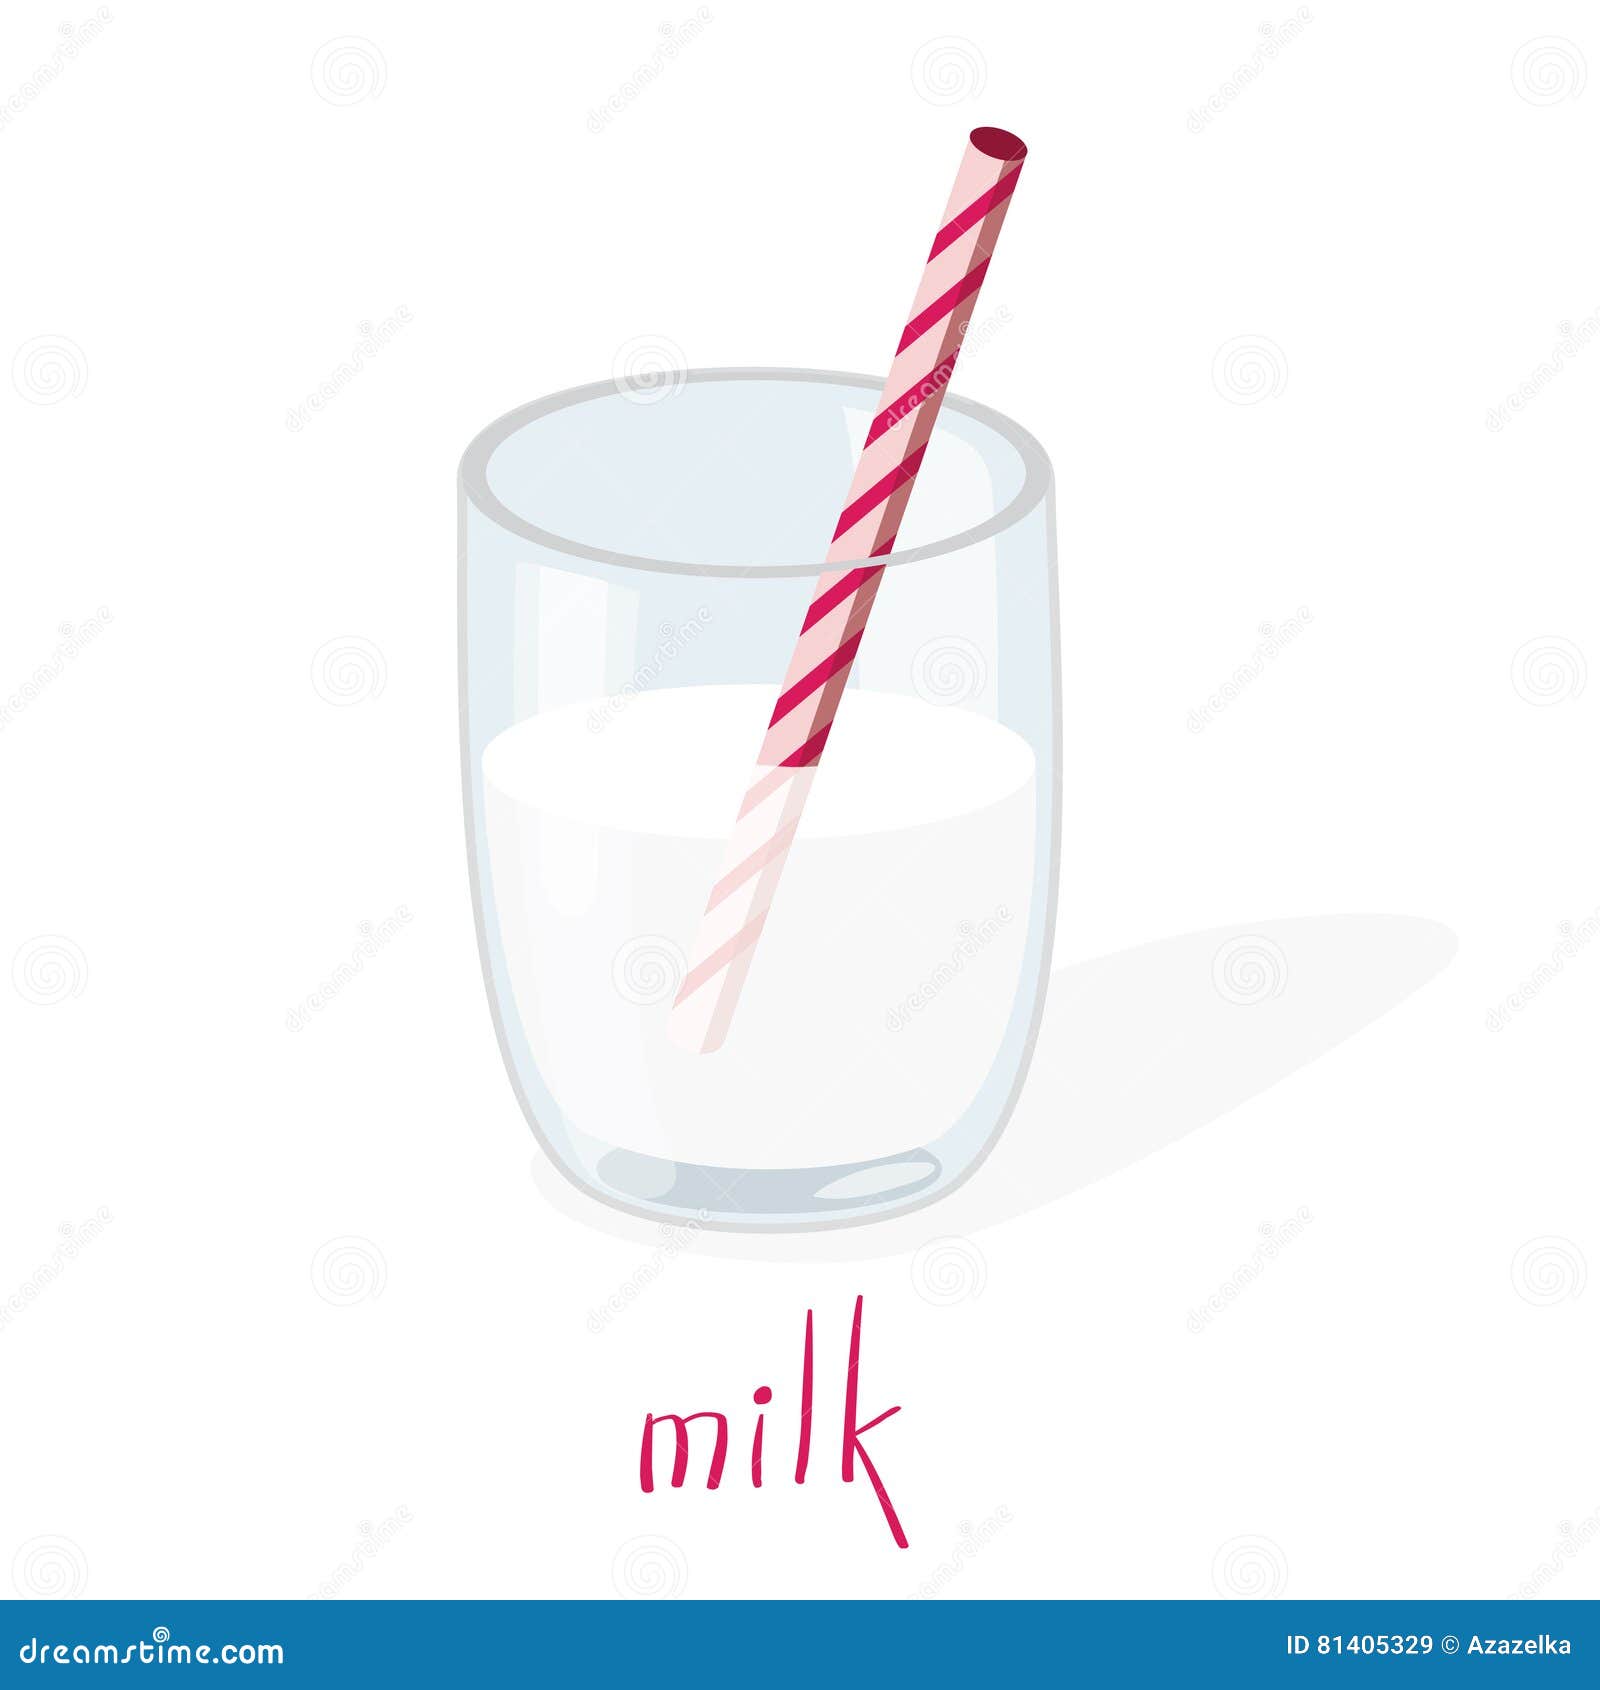 It Is One Pink Straw Isolated On White.Straw Isolated On White